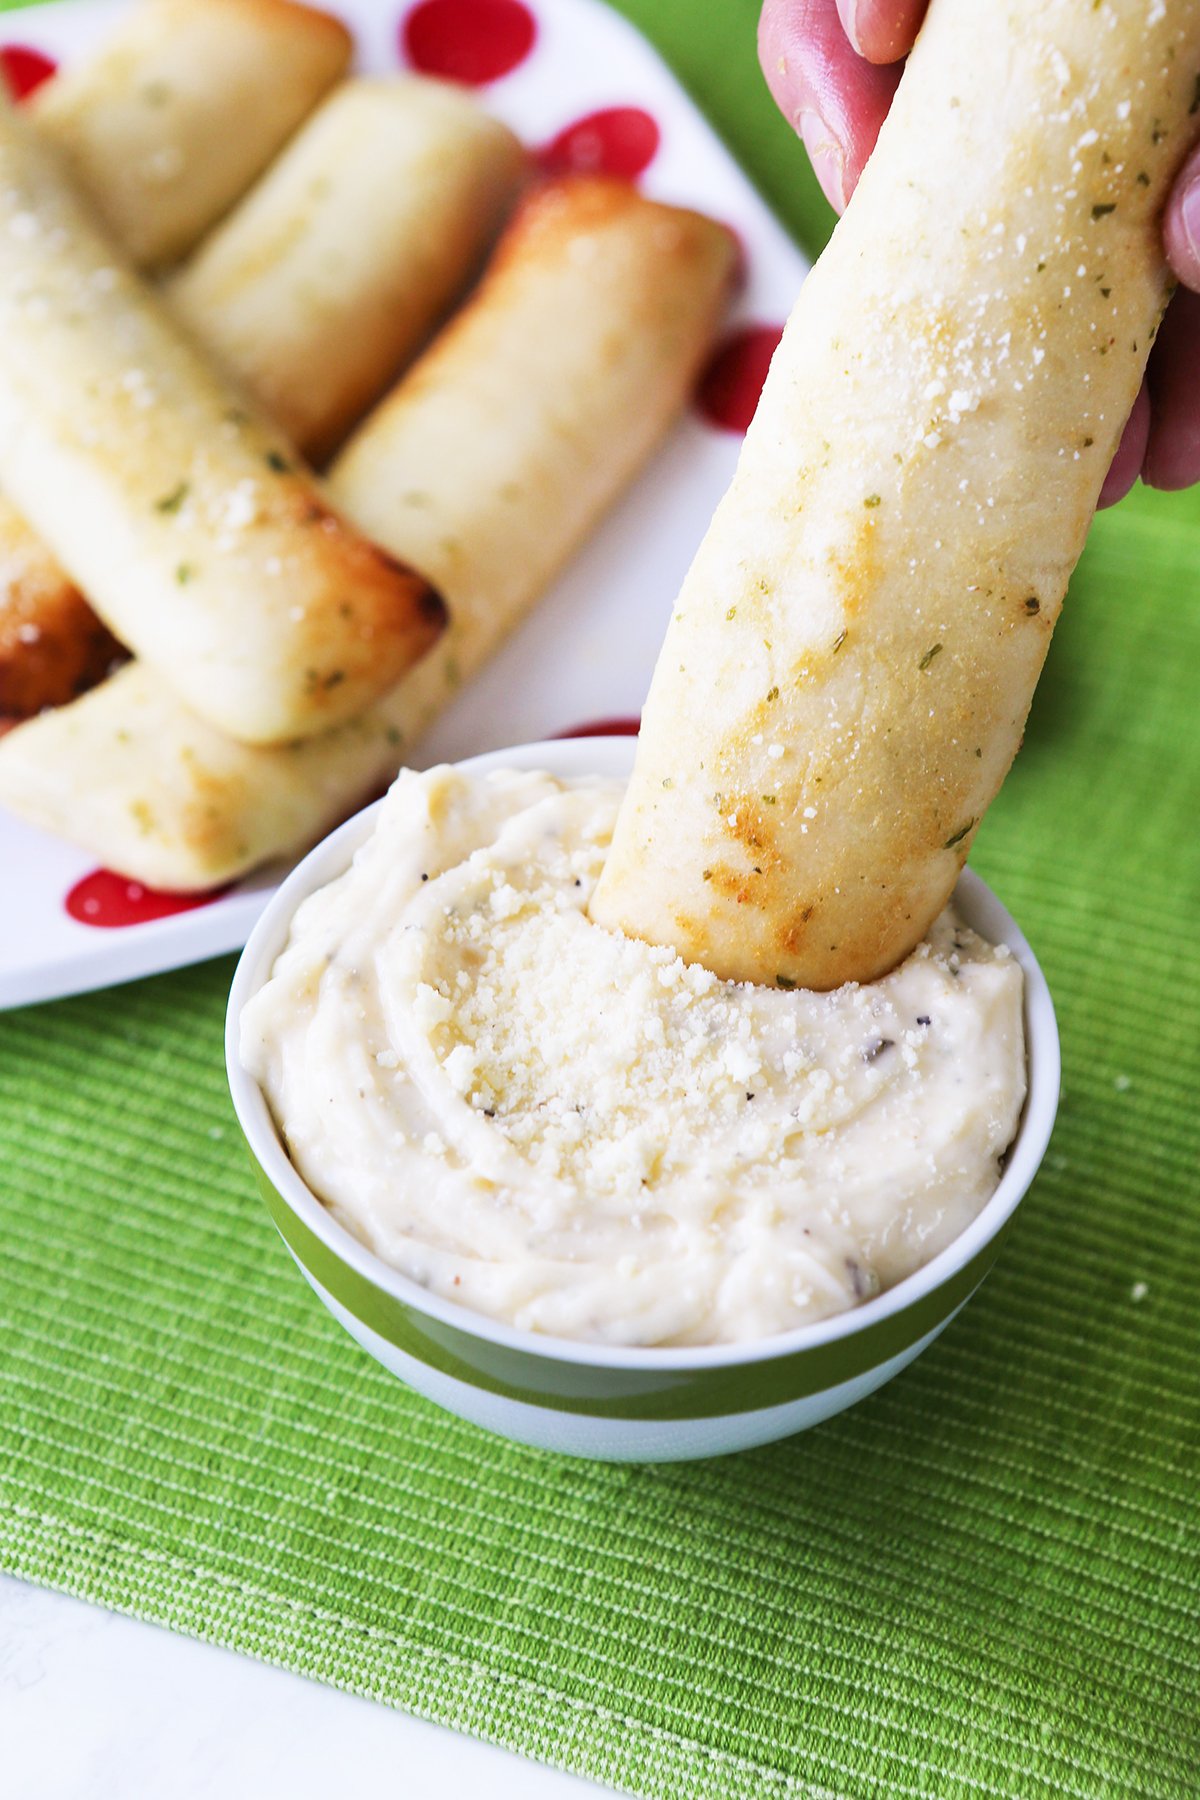 Breadstick being dipped into a bowl of creamy white sauce.